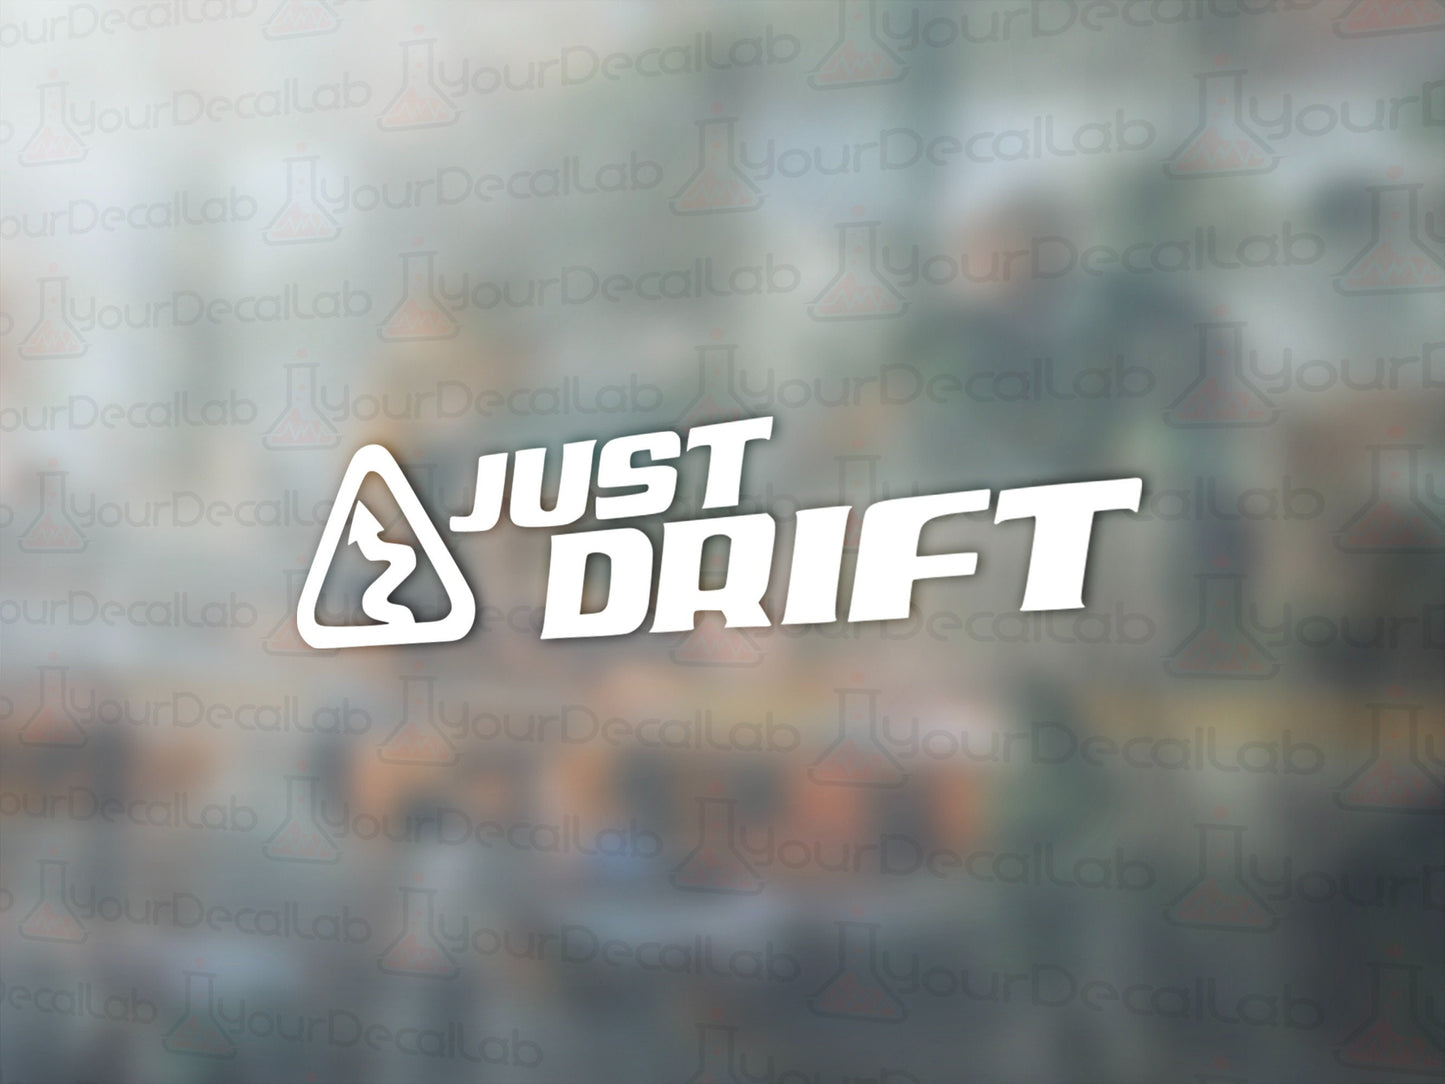 Just Drift Decal - Many Colors & Sizes